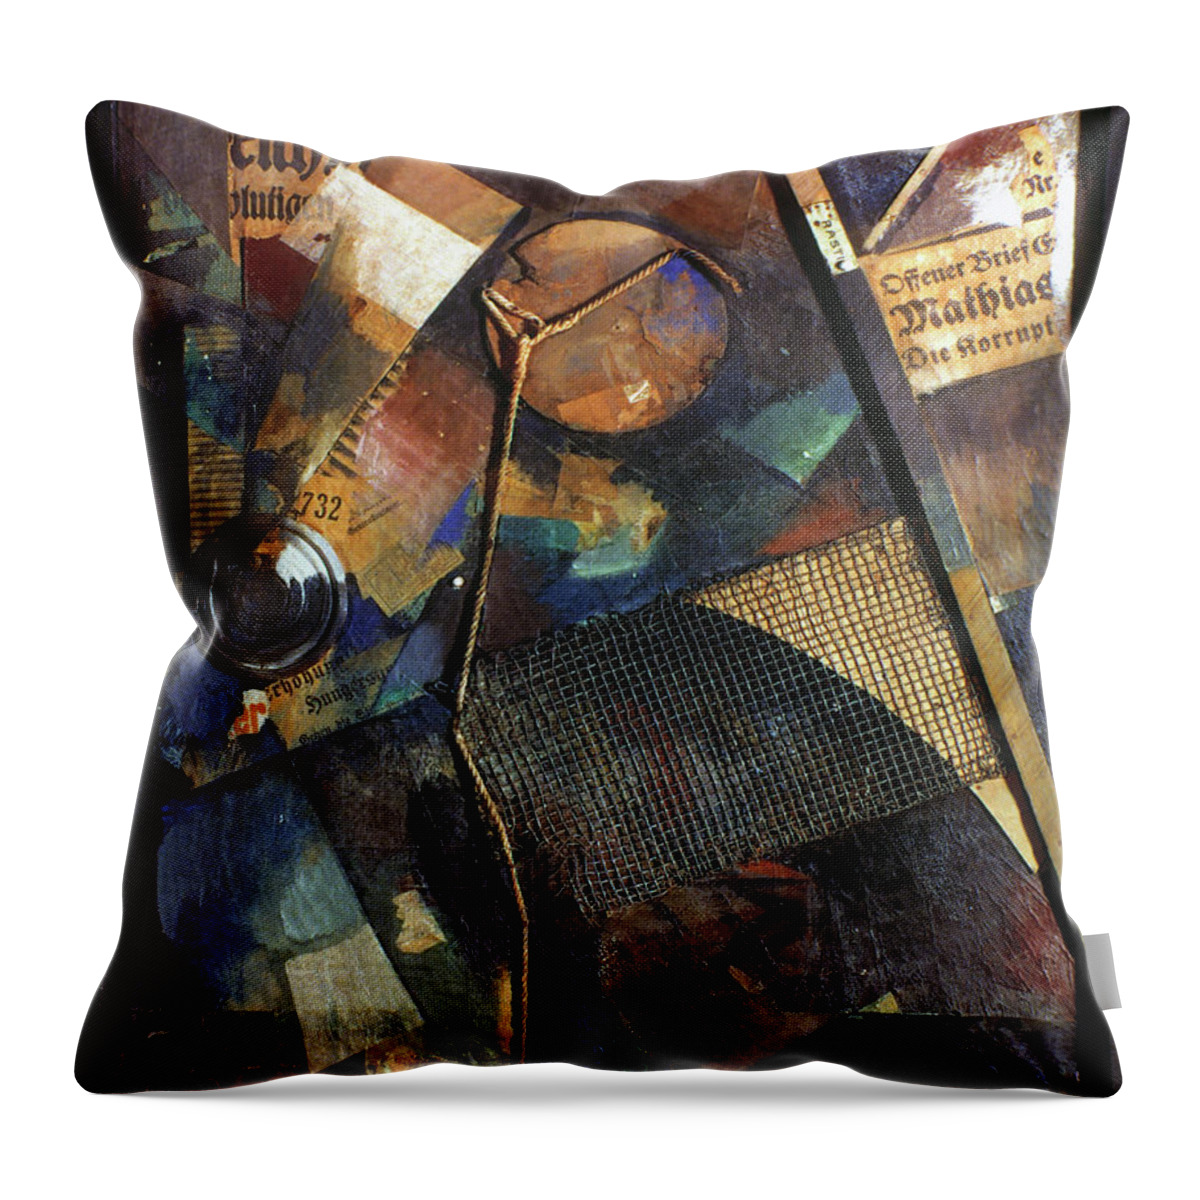 1920 Throw Pillow featuring the painting Merzbild, 25a by Kurt Schwitters